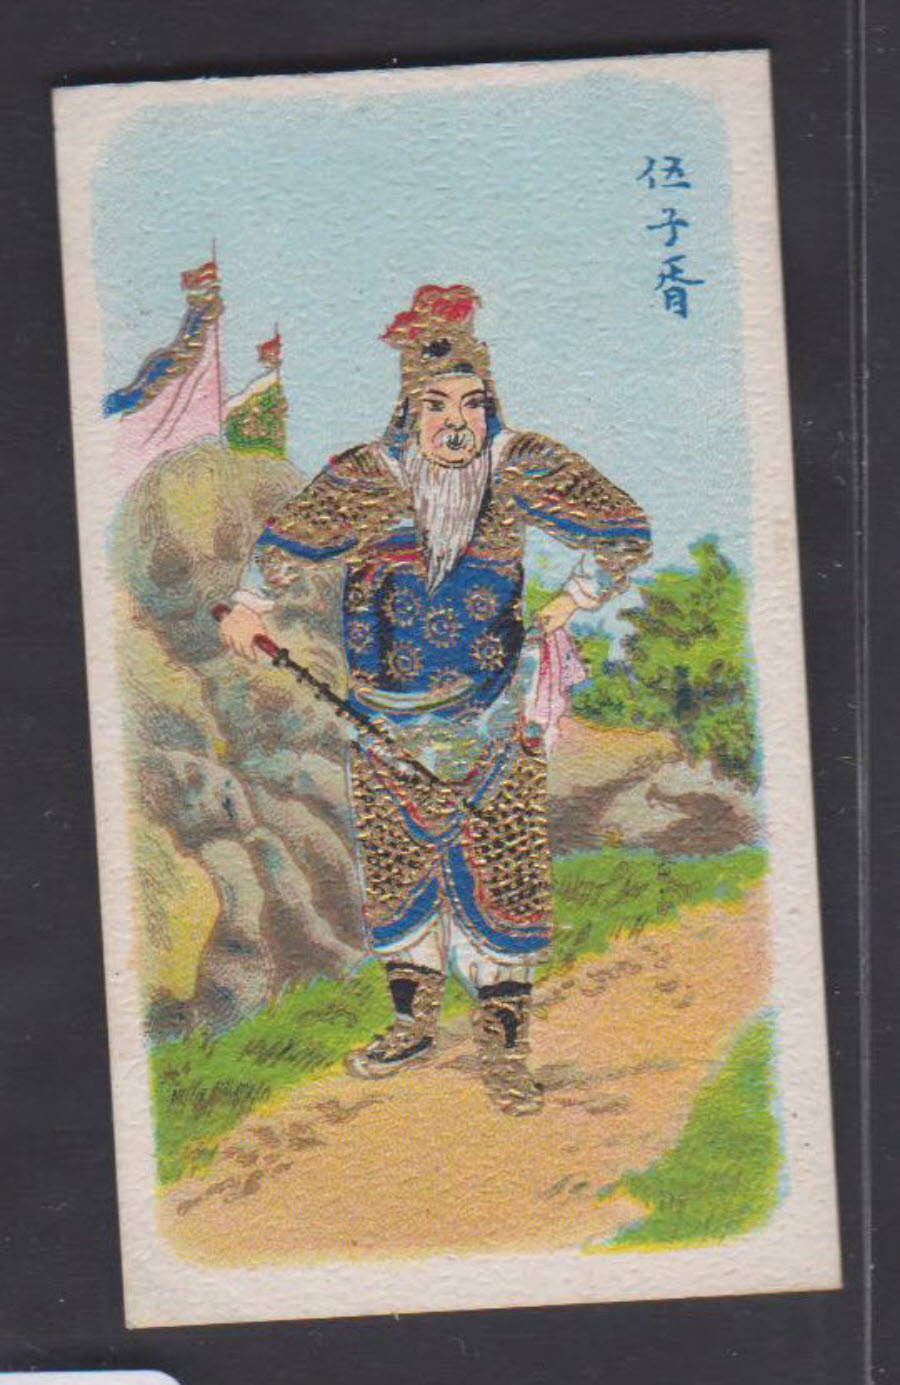 Wills (Pirate) - China's Ancient Warriors - No.36 Fig.98 Wills' Issues Book